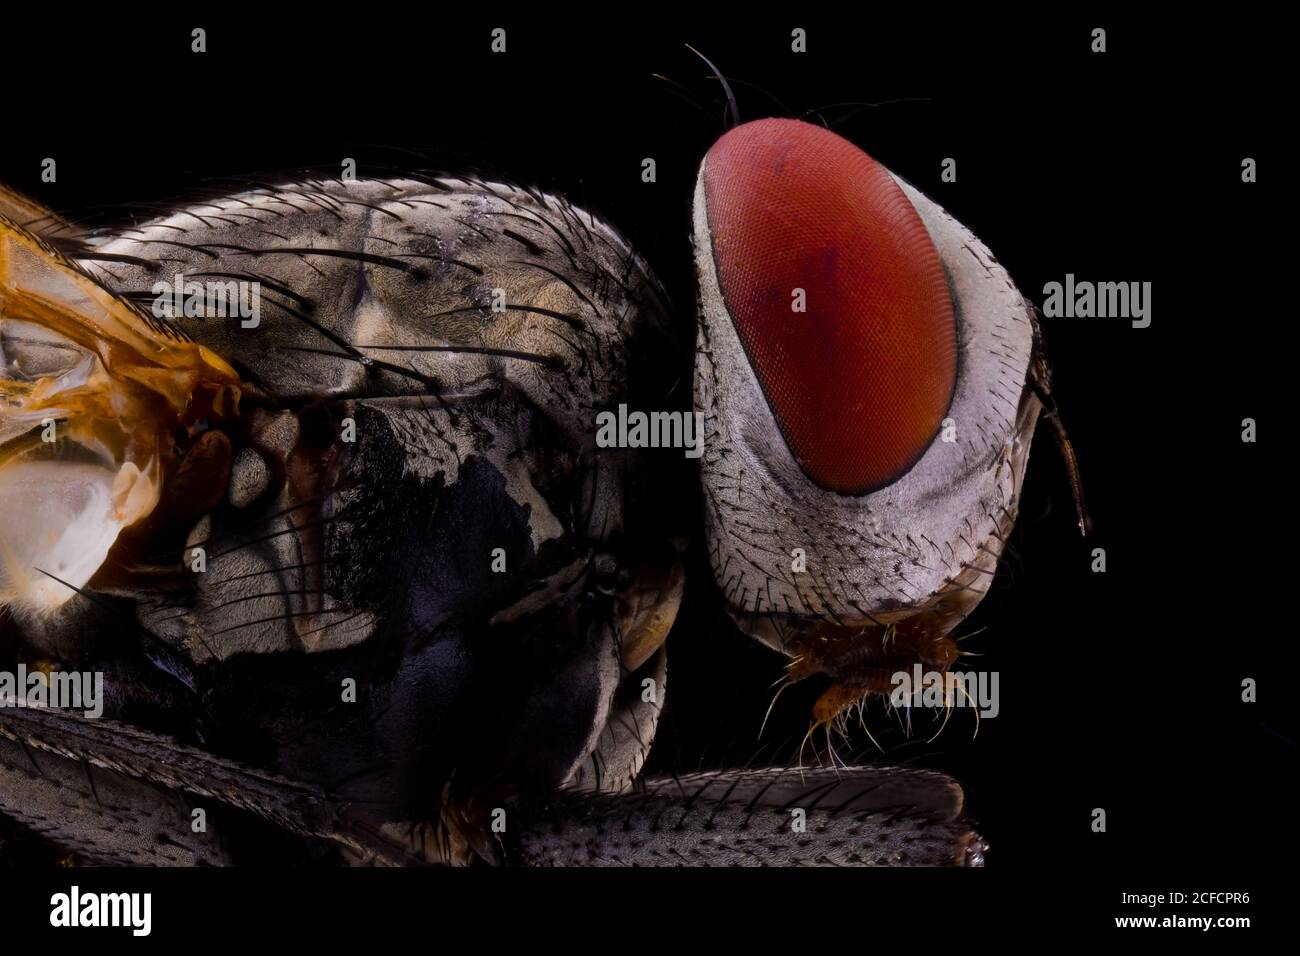 Closeup side view of magnified brown fly with large red eyes and transparent wings Stock Photo